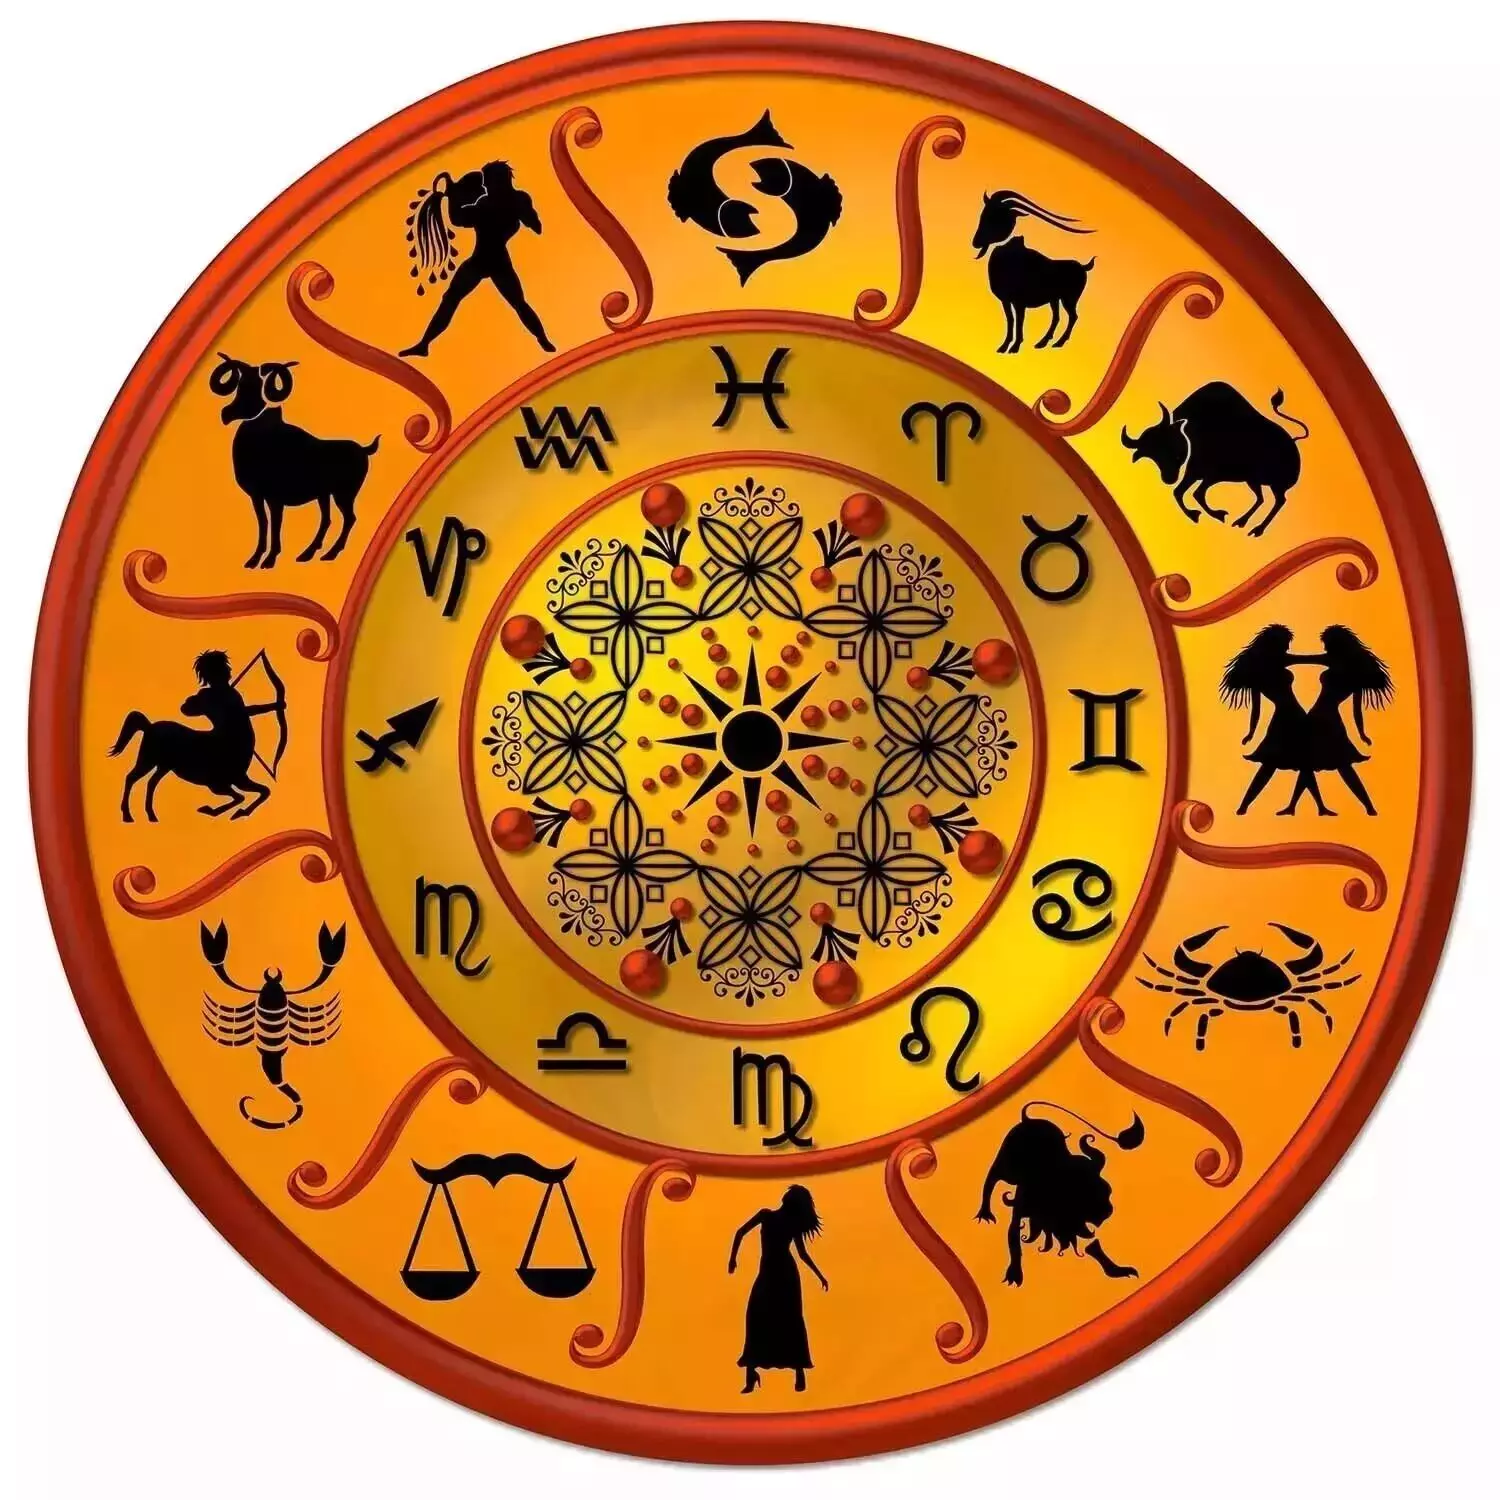 03 December – Know your todays horoscope